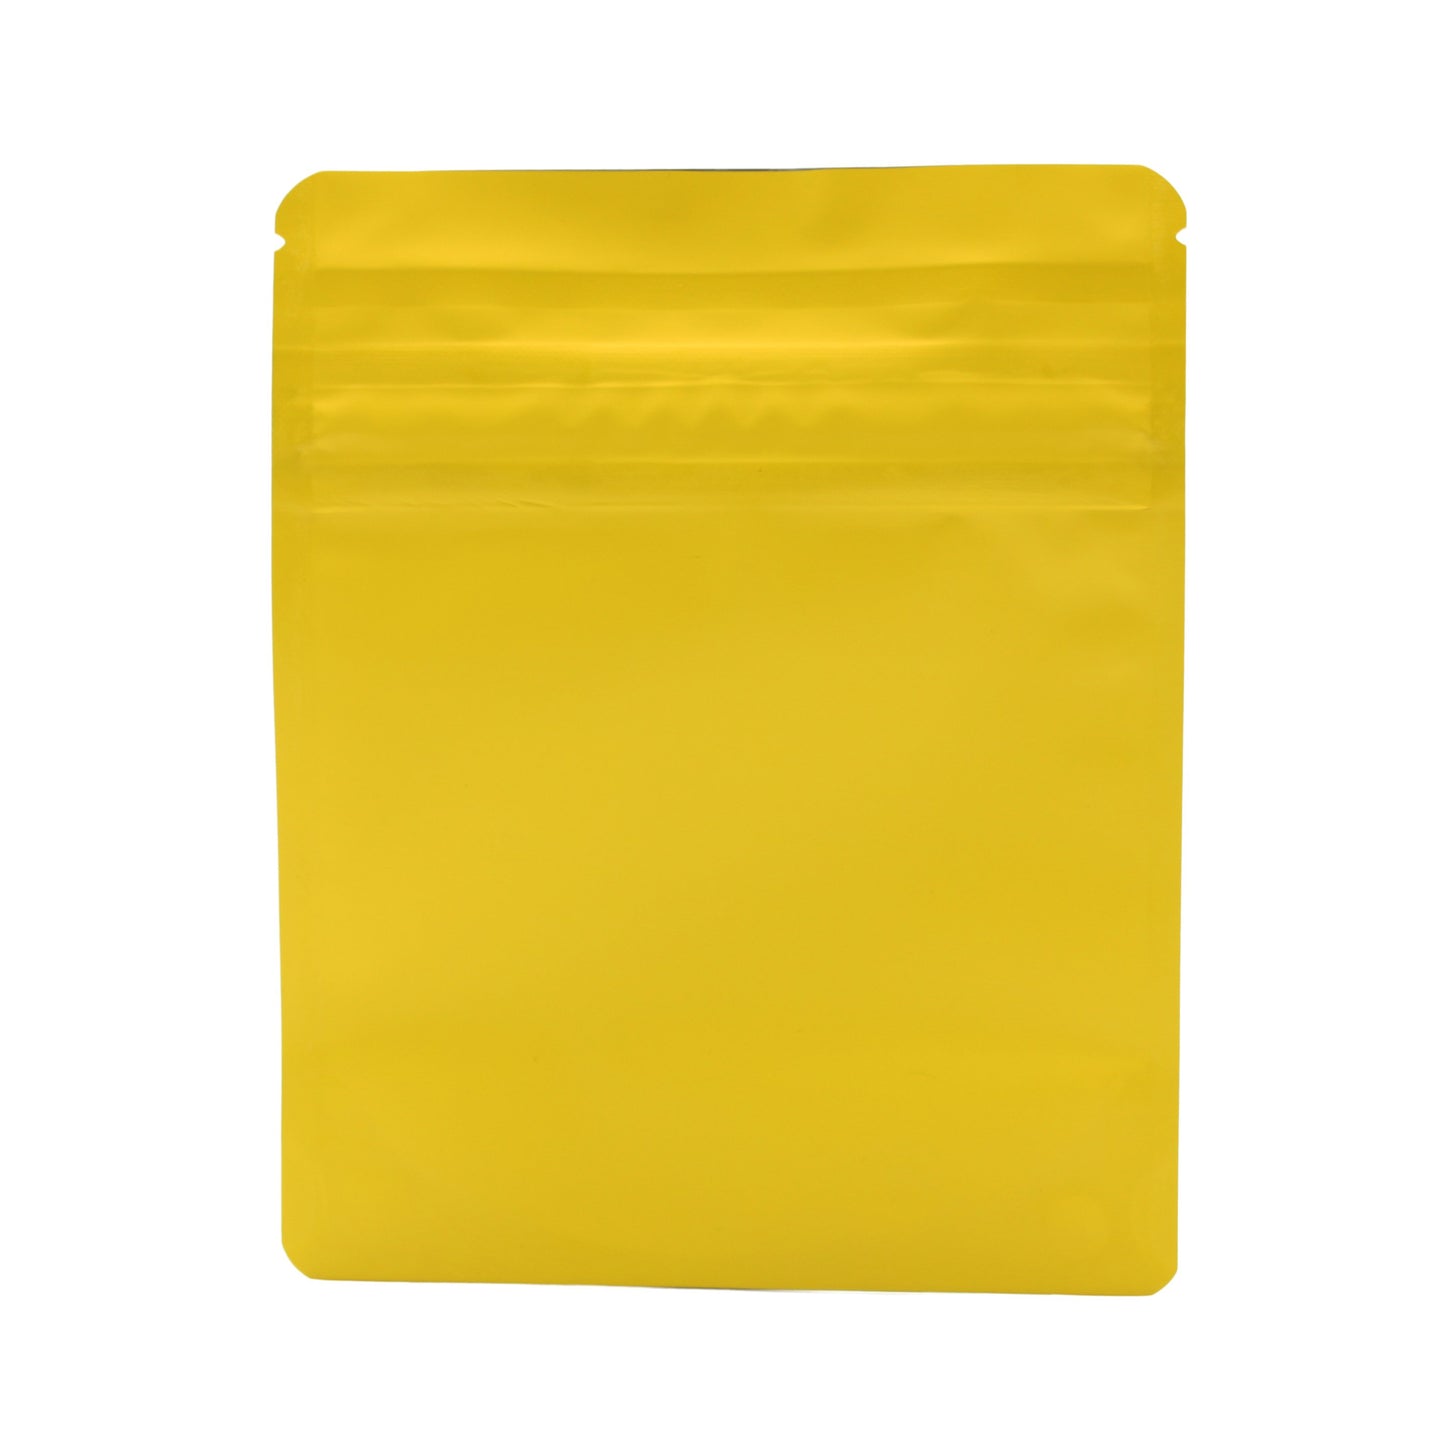 Bag King Child-Resistant Opaque Wide Mouth Bag (1/4th oz) 4.7" x 5.9" Matte Yellow